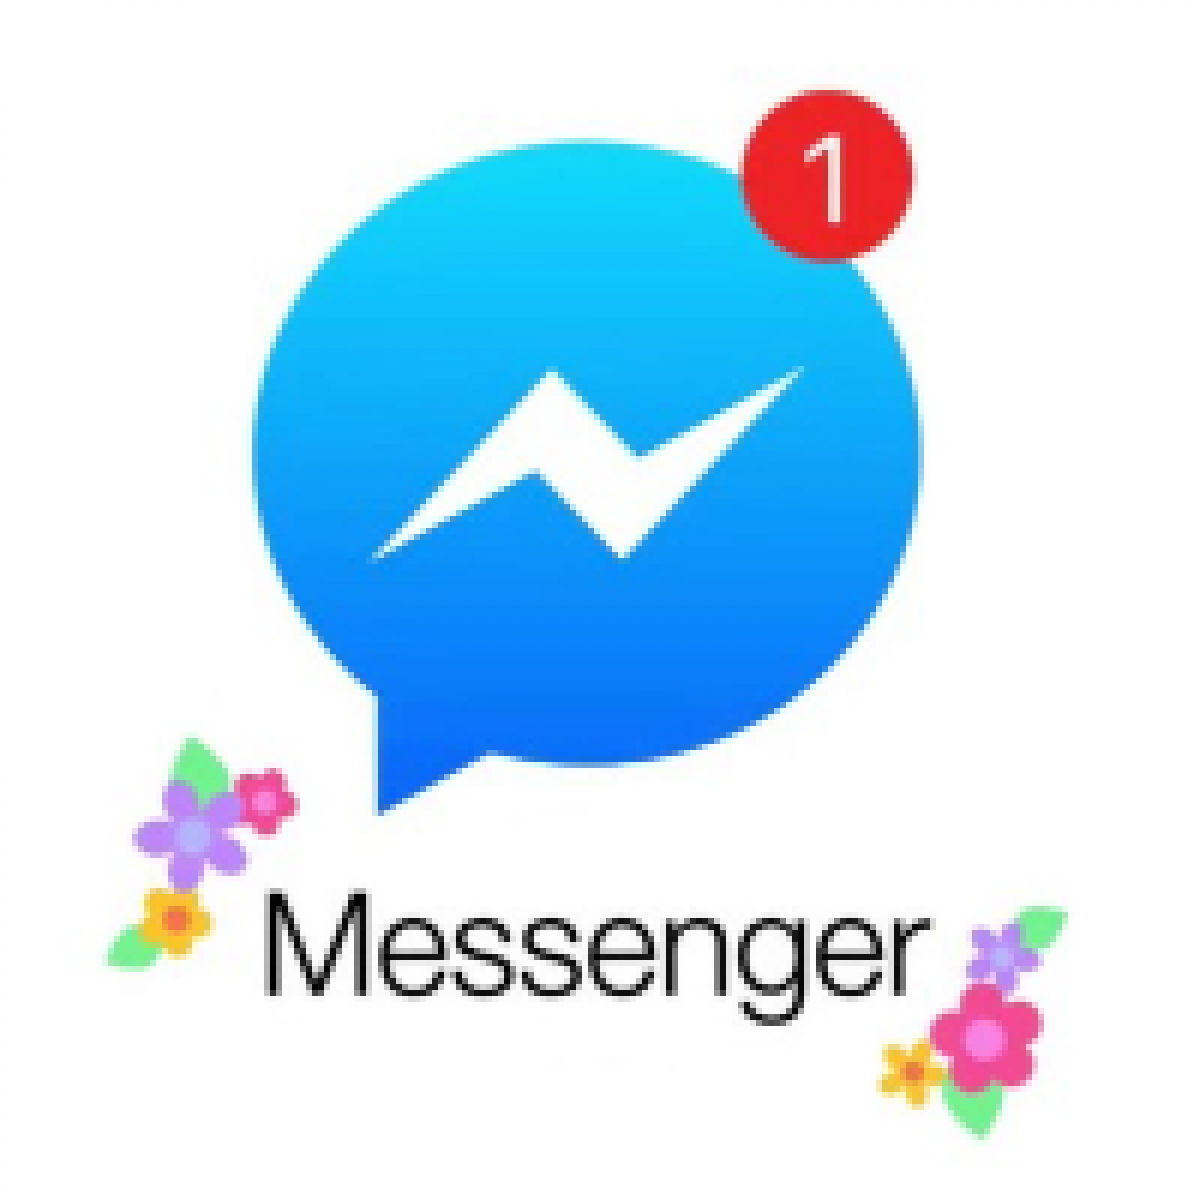 How do I install Facebook Messenger on my PC?